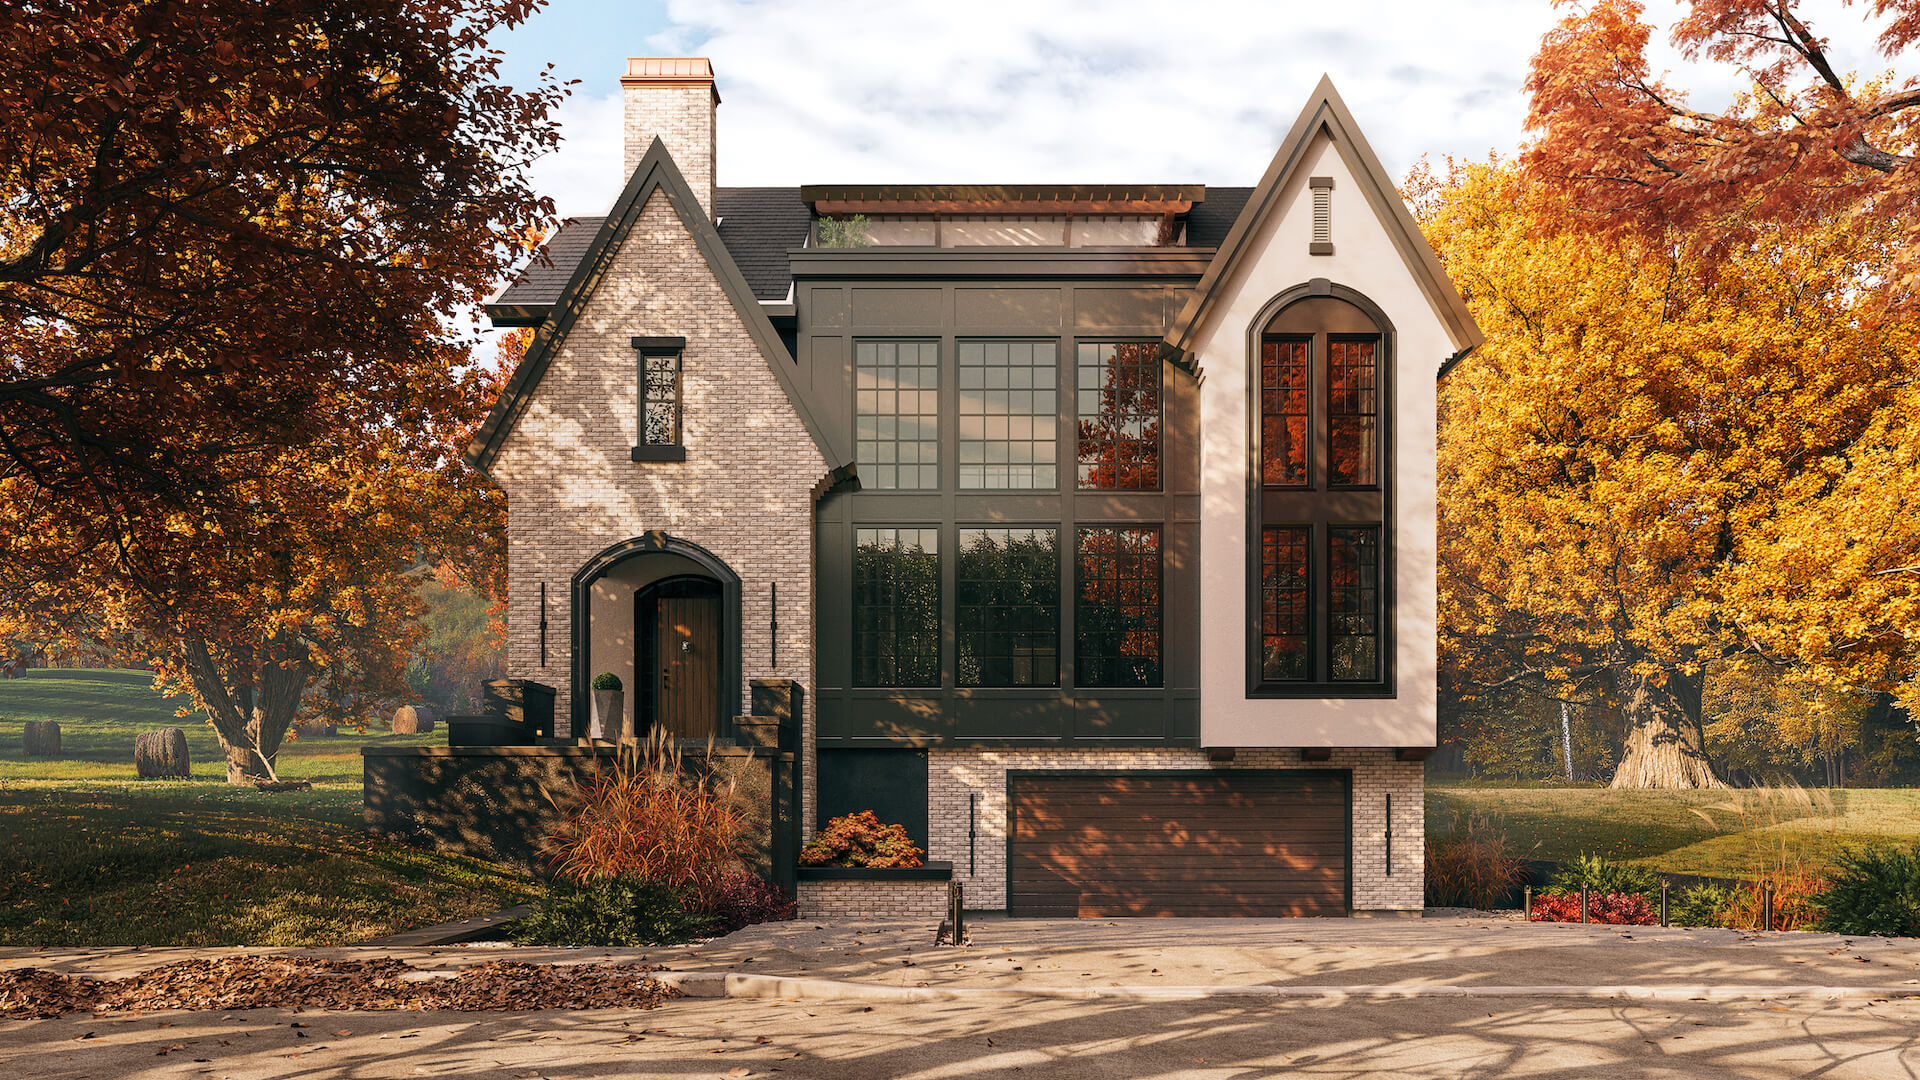 Beautiful 3D Visualization of a House in a Fall Setting